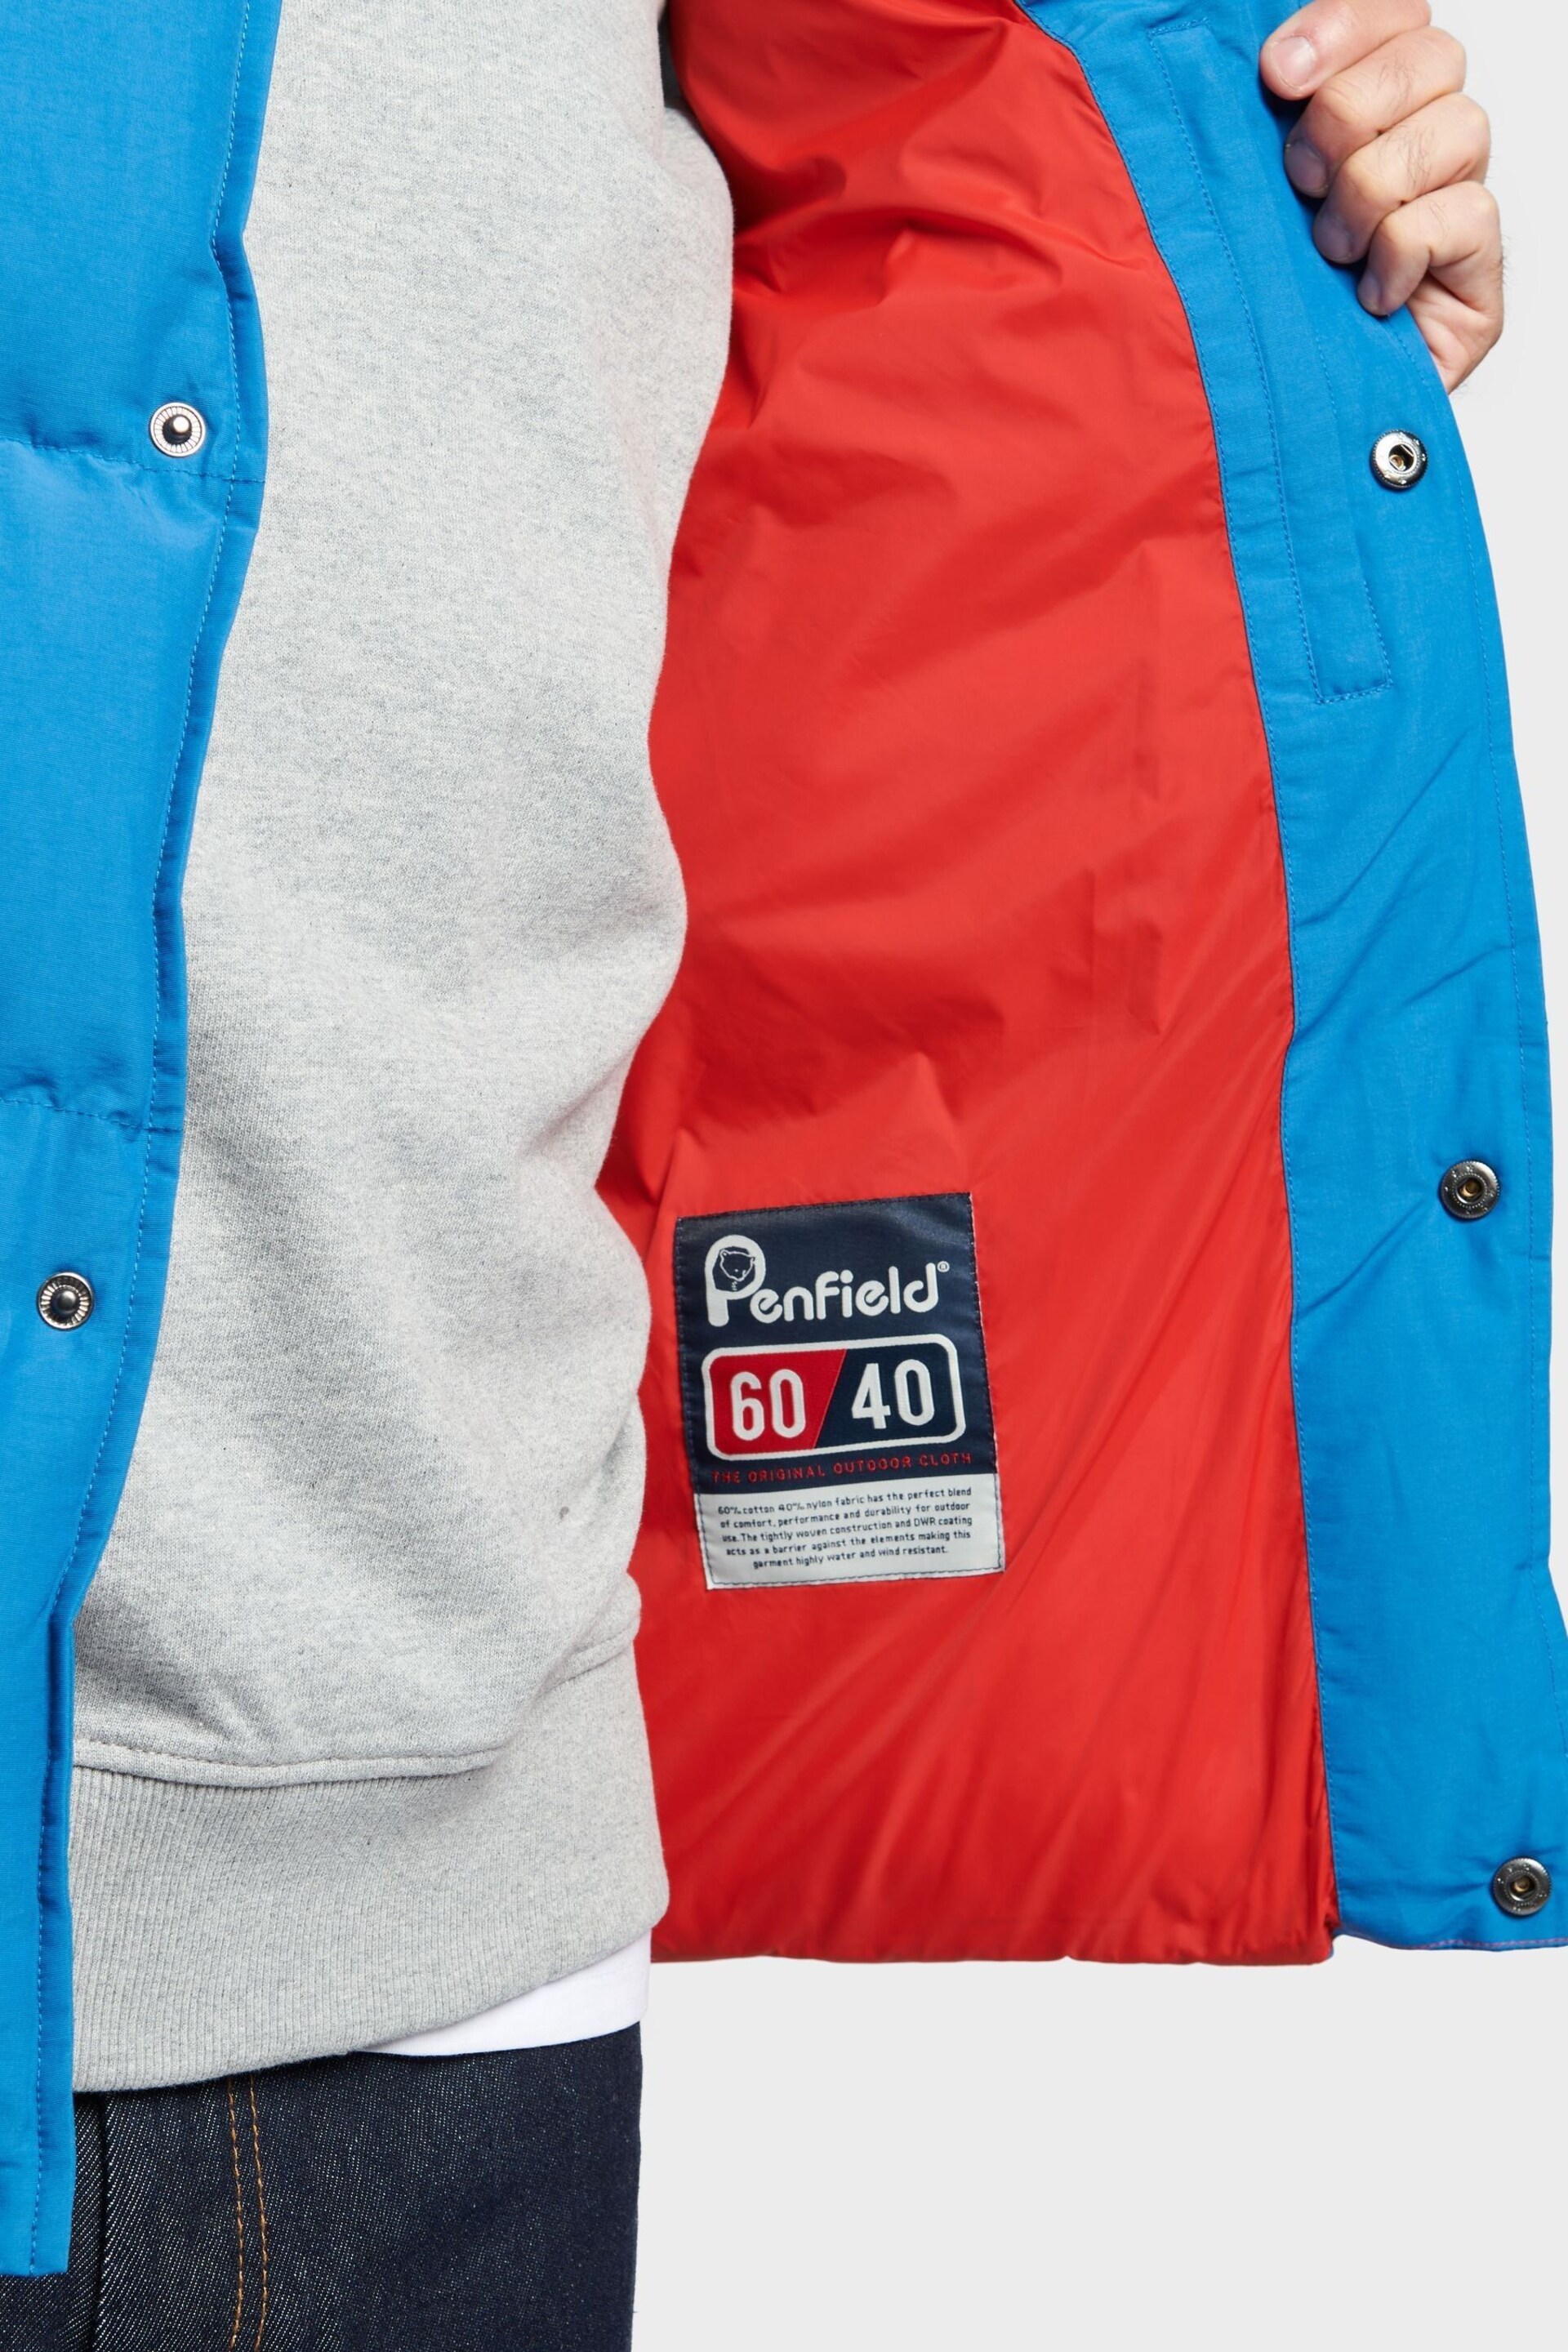 Penfield Blue Outback Gilet - Image 6 of 9